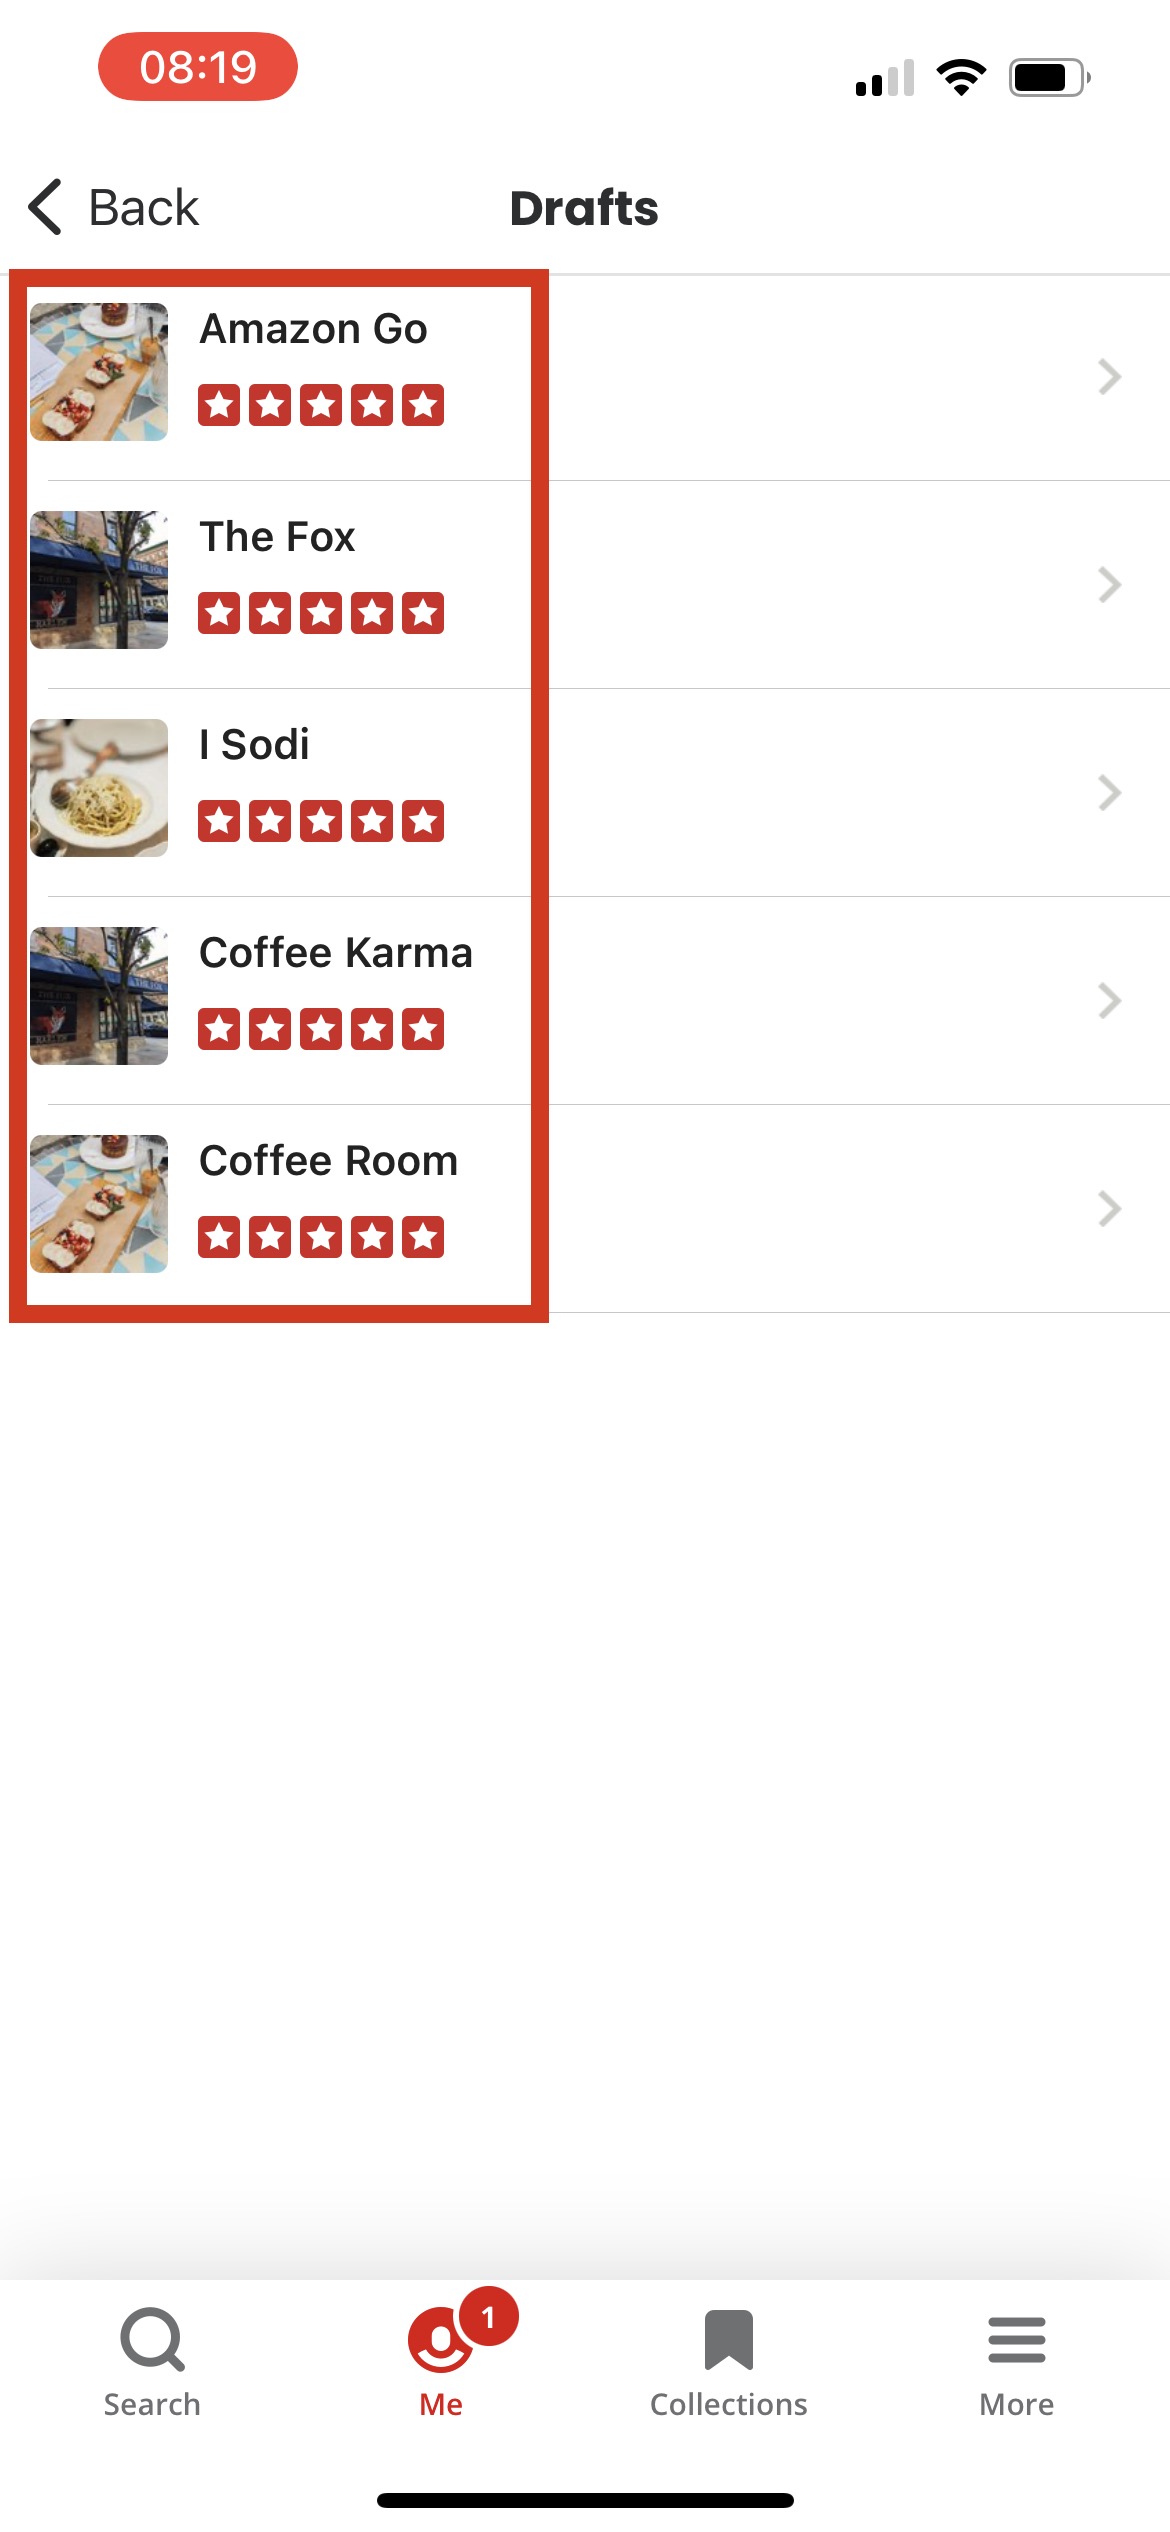 Restaurant icons get substituted in 